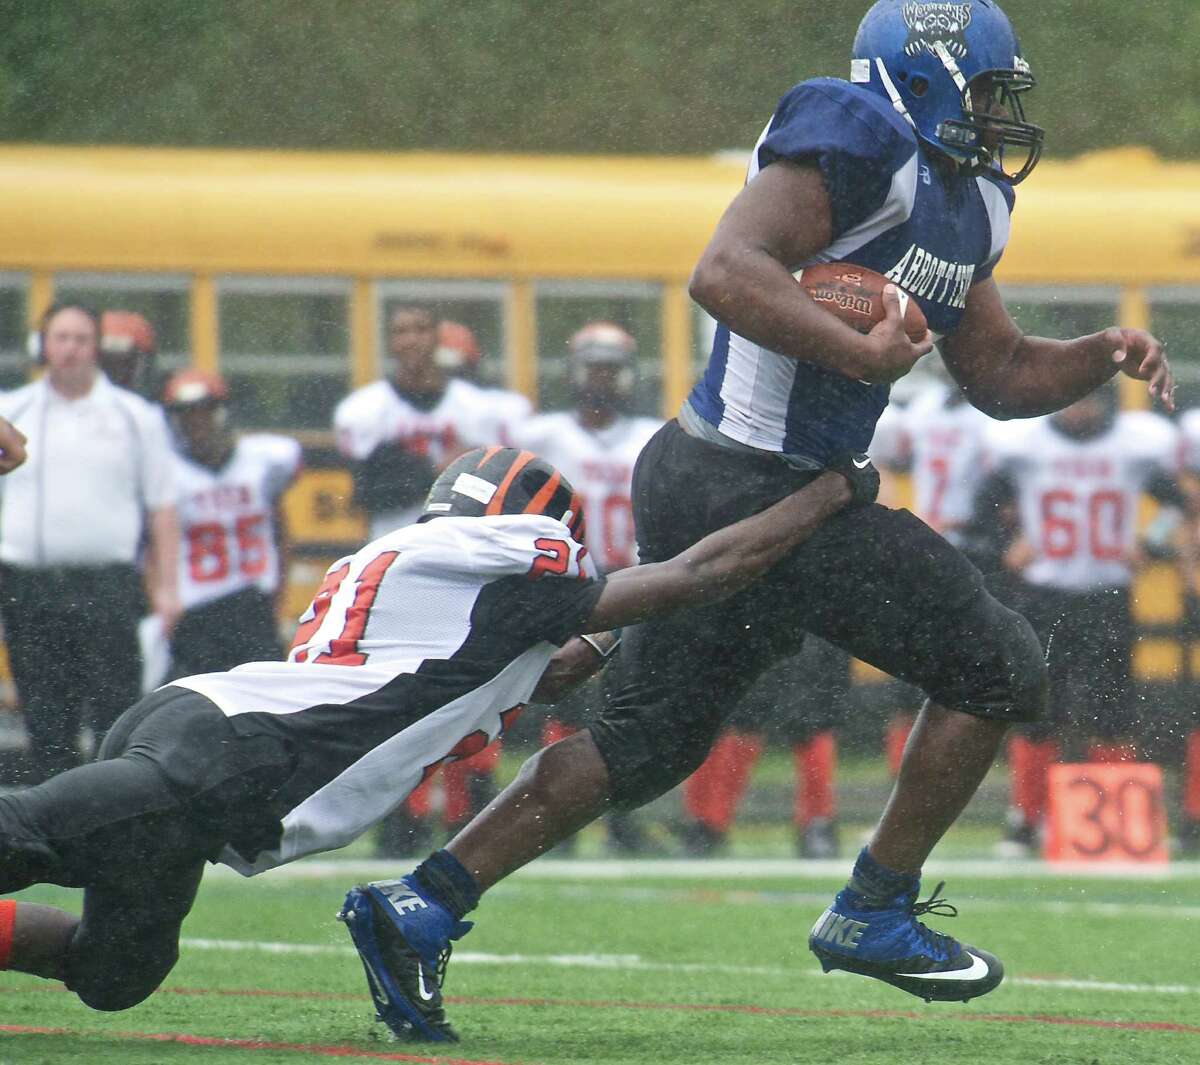 FILE PHOTO: Bullard-Havens Hakeem Fletcher, 21, is dragged downfield as he tries to tackle Abbott Tech's Delton Rogers, 35, during a High School football game between Bullard-Havens Tech and Abbott Tech High School's at Perry Memorial Field in Rogers Park, Danbury, Conn, Saturday, September 21, 2013.